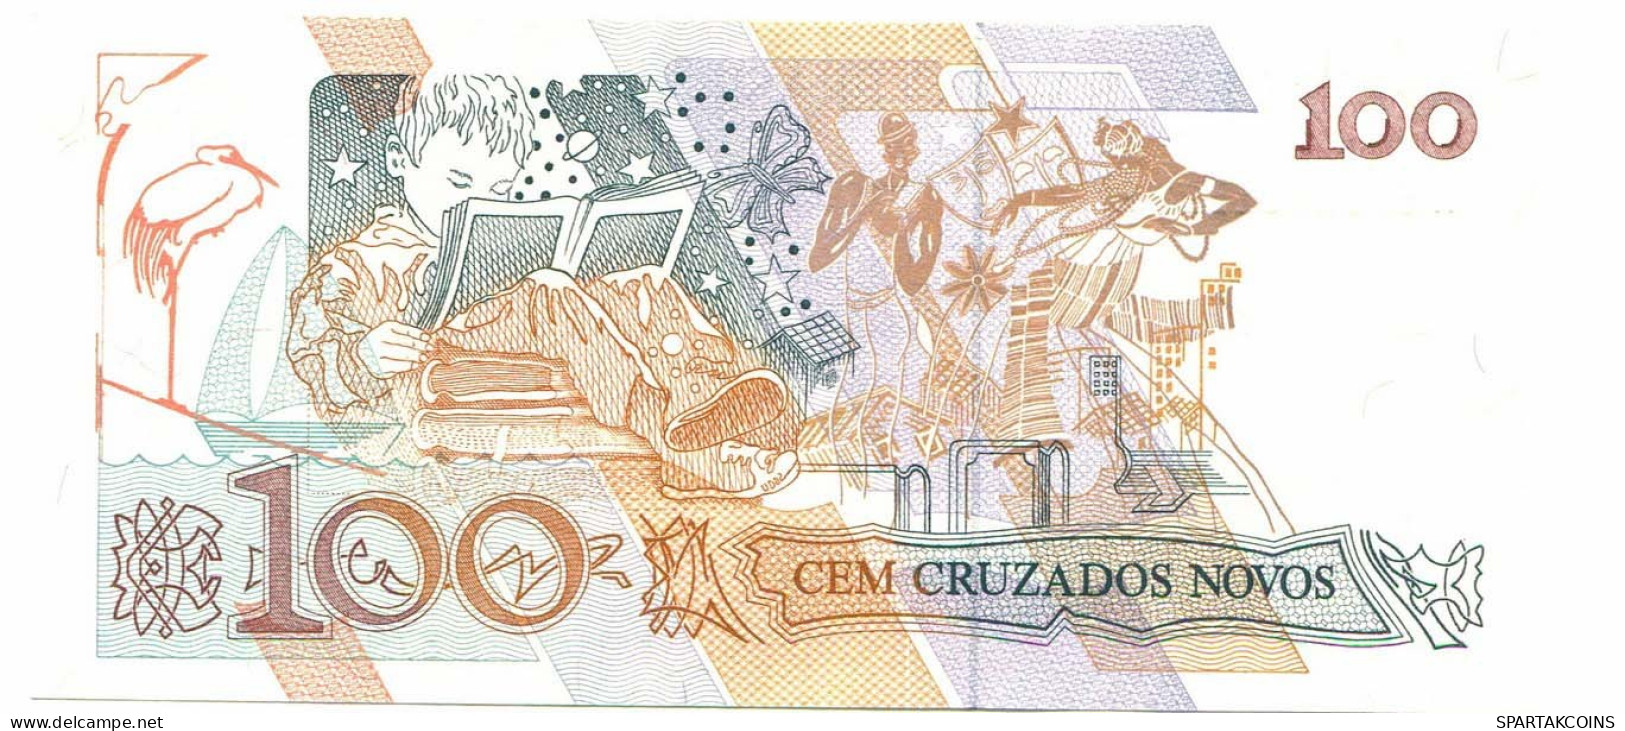 BRASIL 100 CRUZADOS 1990 UNC Paper Money Banknote #P10857.4 - [11] Local Banknote Issues